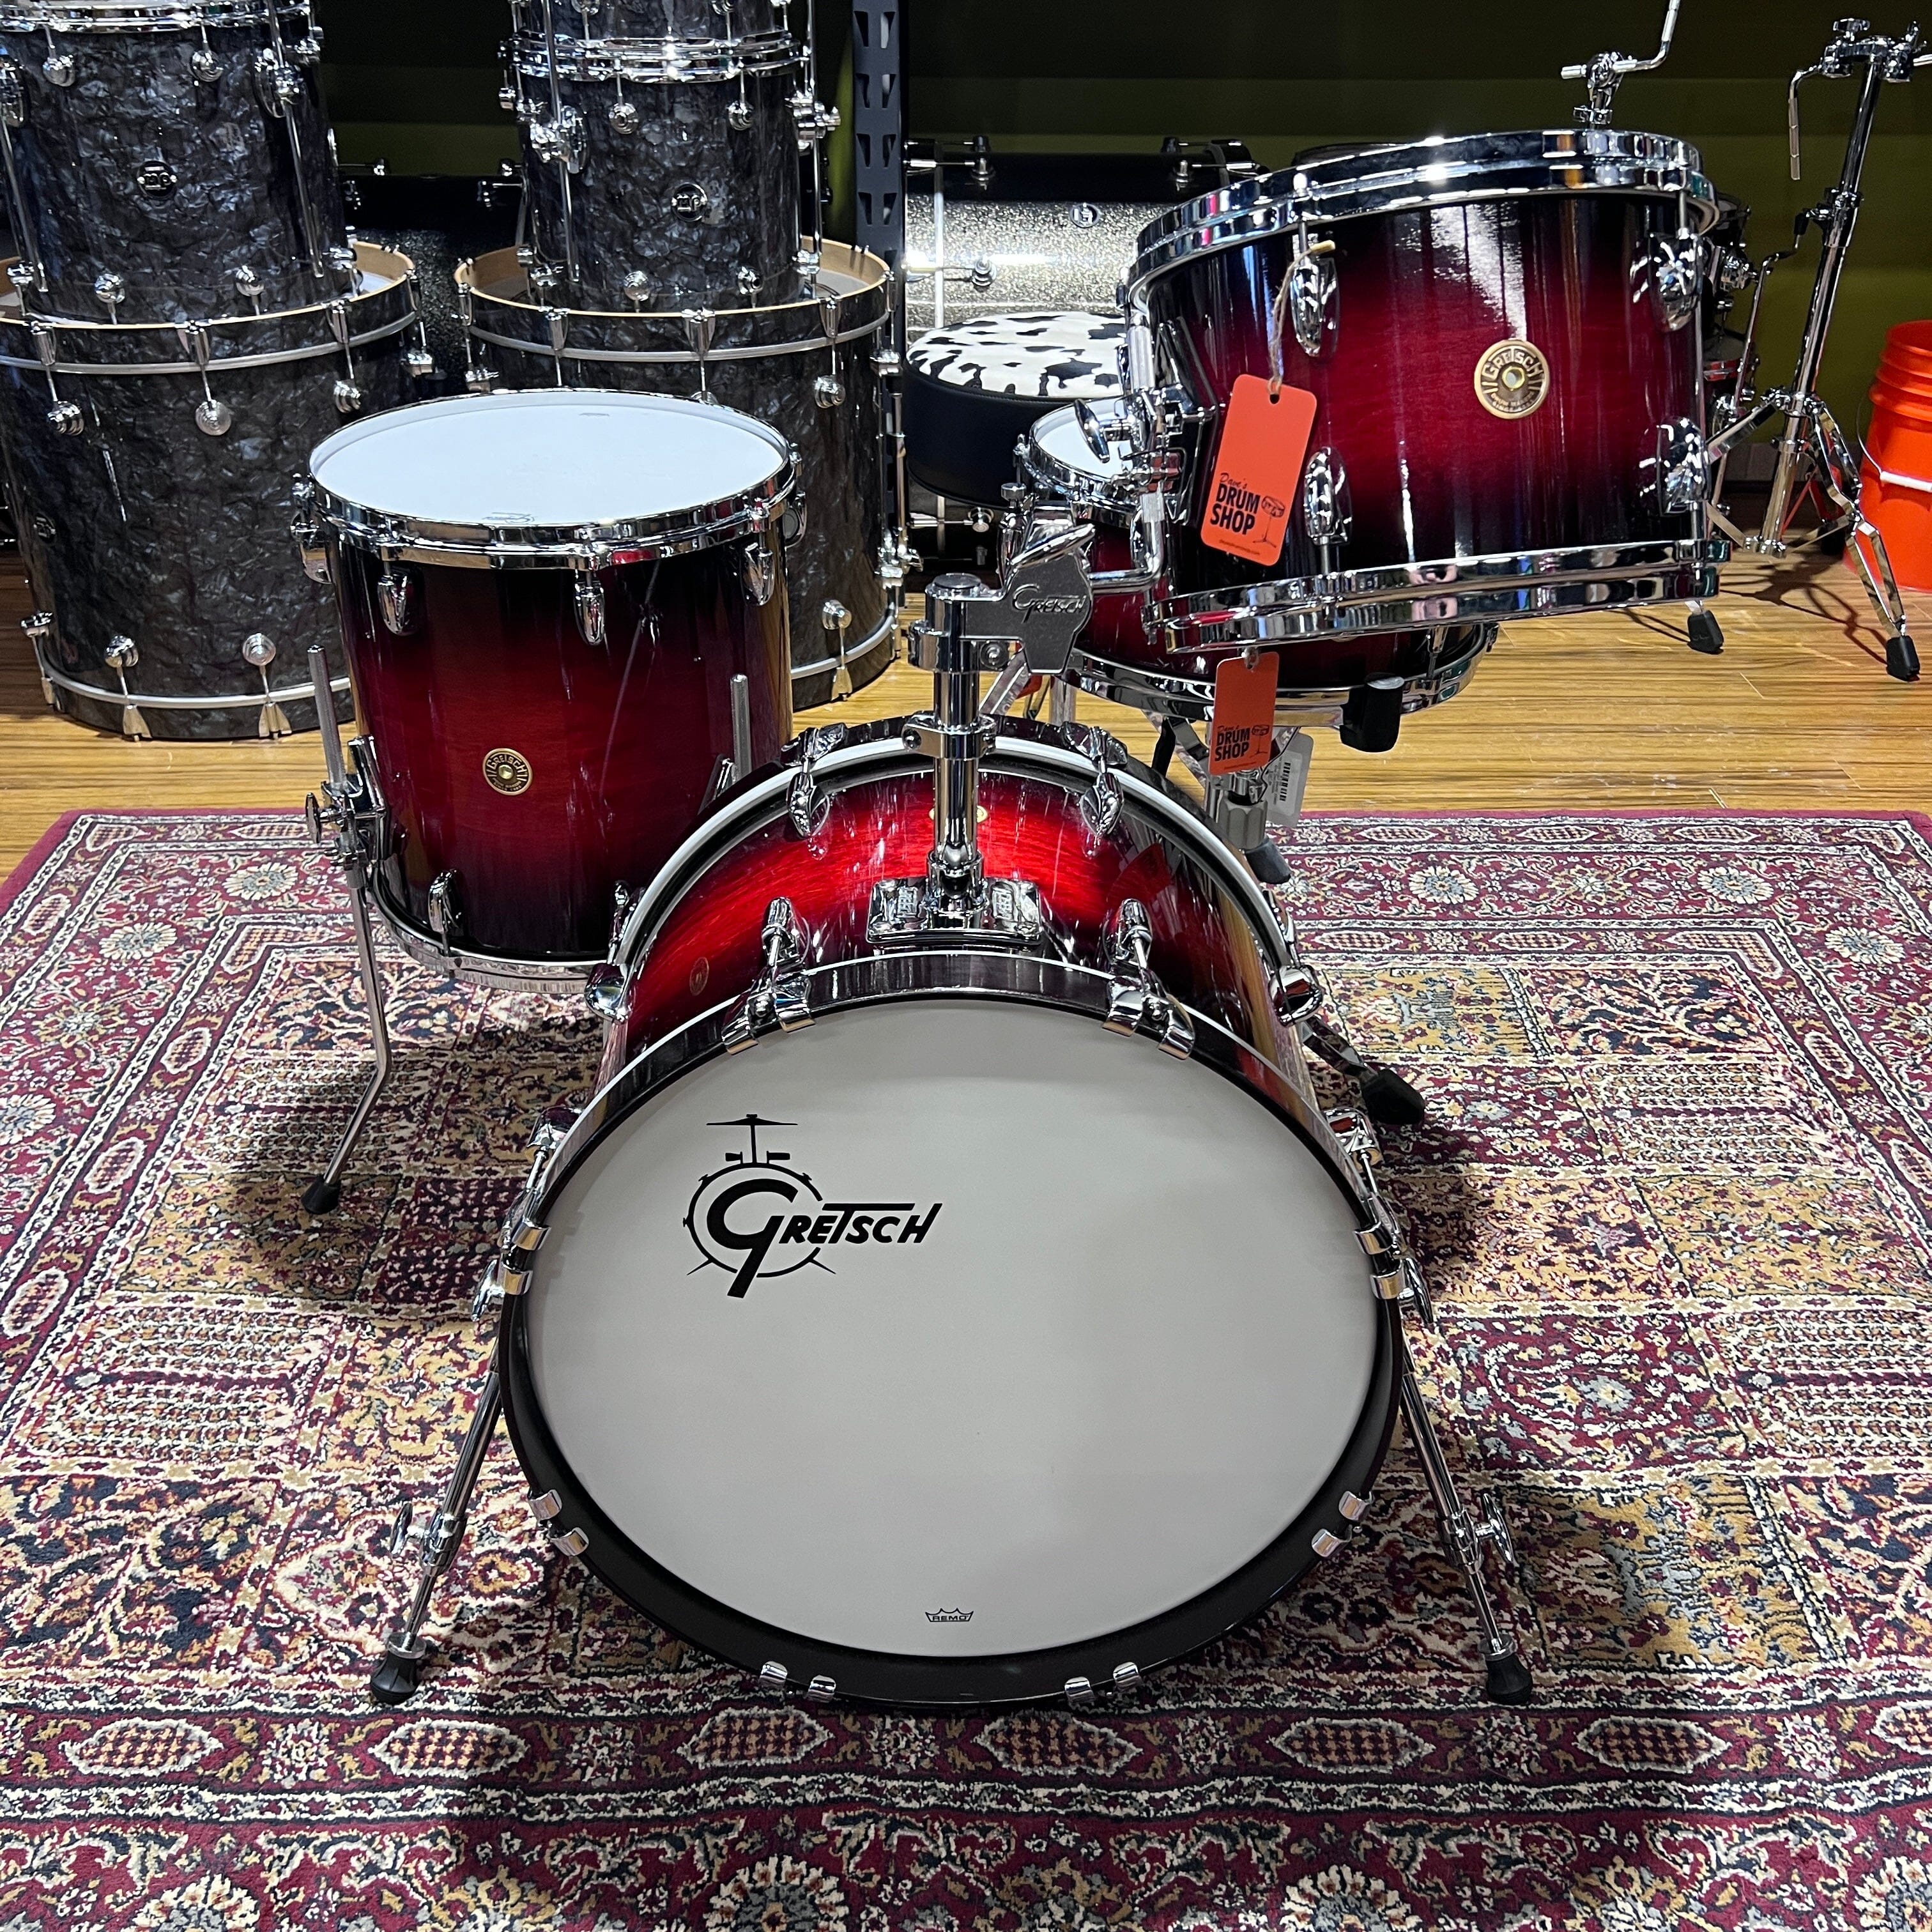 Gretsch USA Custom 12/14/20 Rosewood Twighlight Gloss Lacquer NEW DRUM KIT Gretsch 